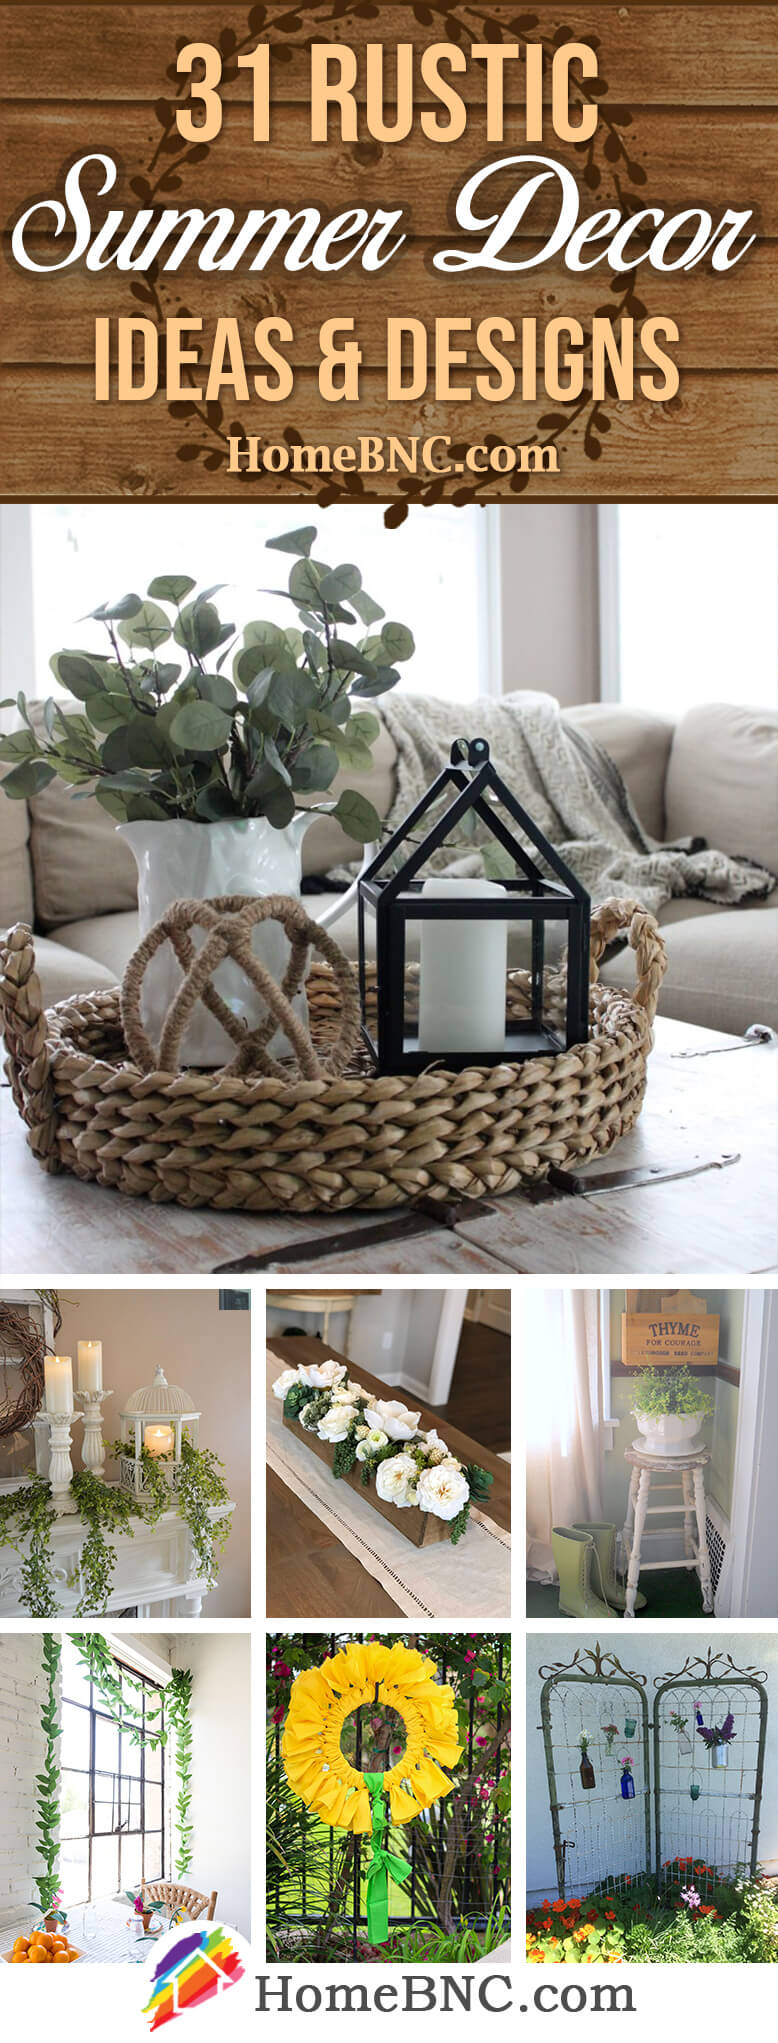 18 Best Rustic Home Decor Ideas for Summer Show Off Your Style in 18